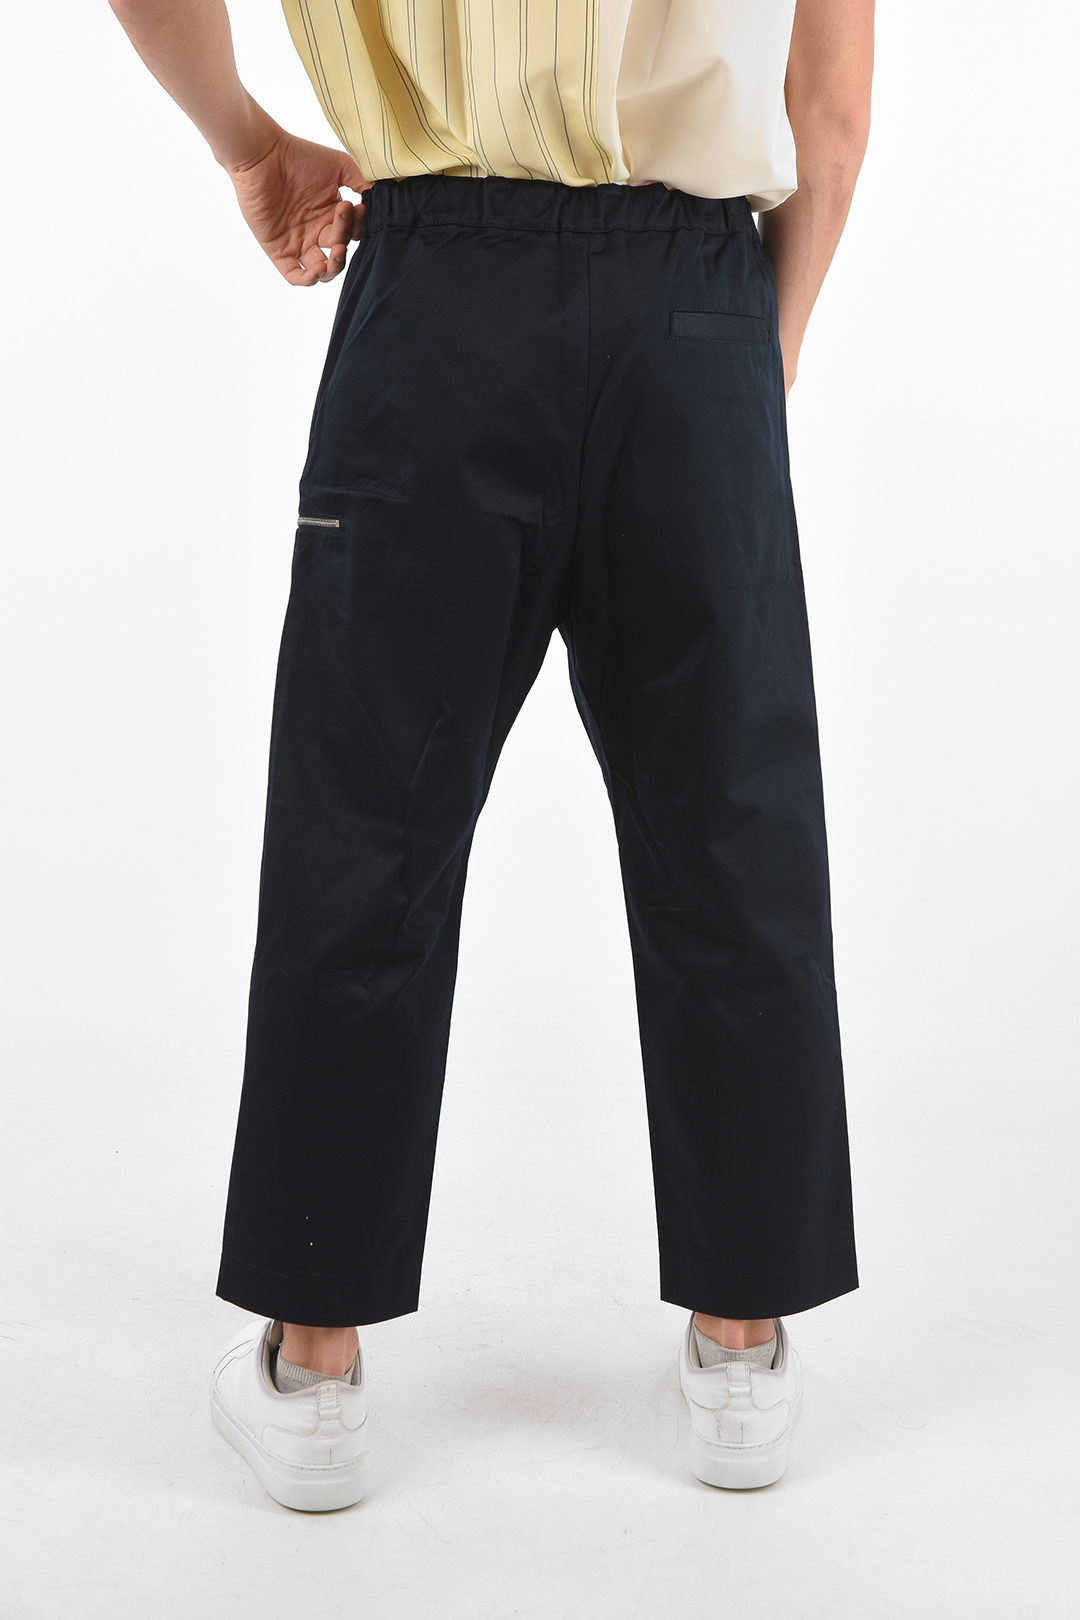 OAMC low waist REGS cropped pants men - Glamood Outlet